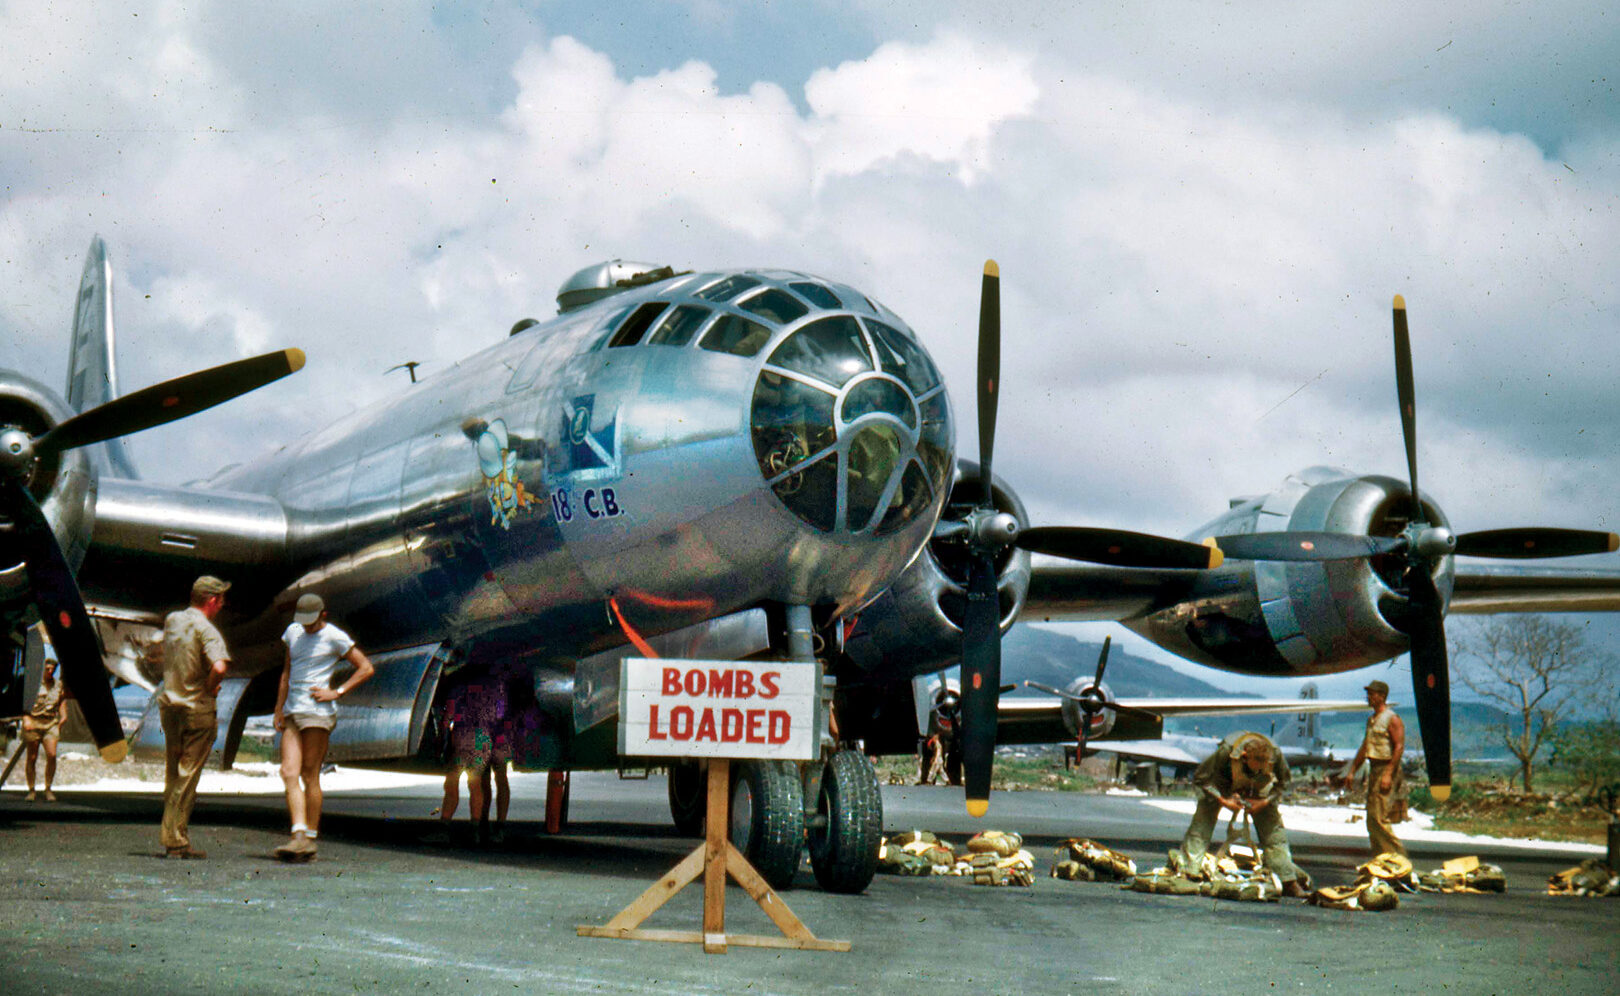 Ground crews at a base on Saipan prepare B-29 “18th C.B.” for a mission. The SeaBee mascot holding a machine gun is painted on the nose. 